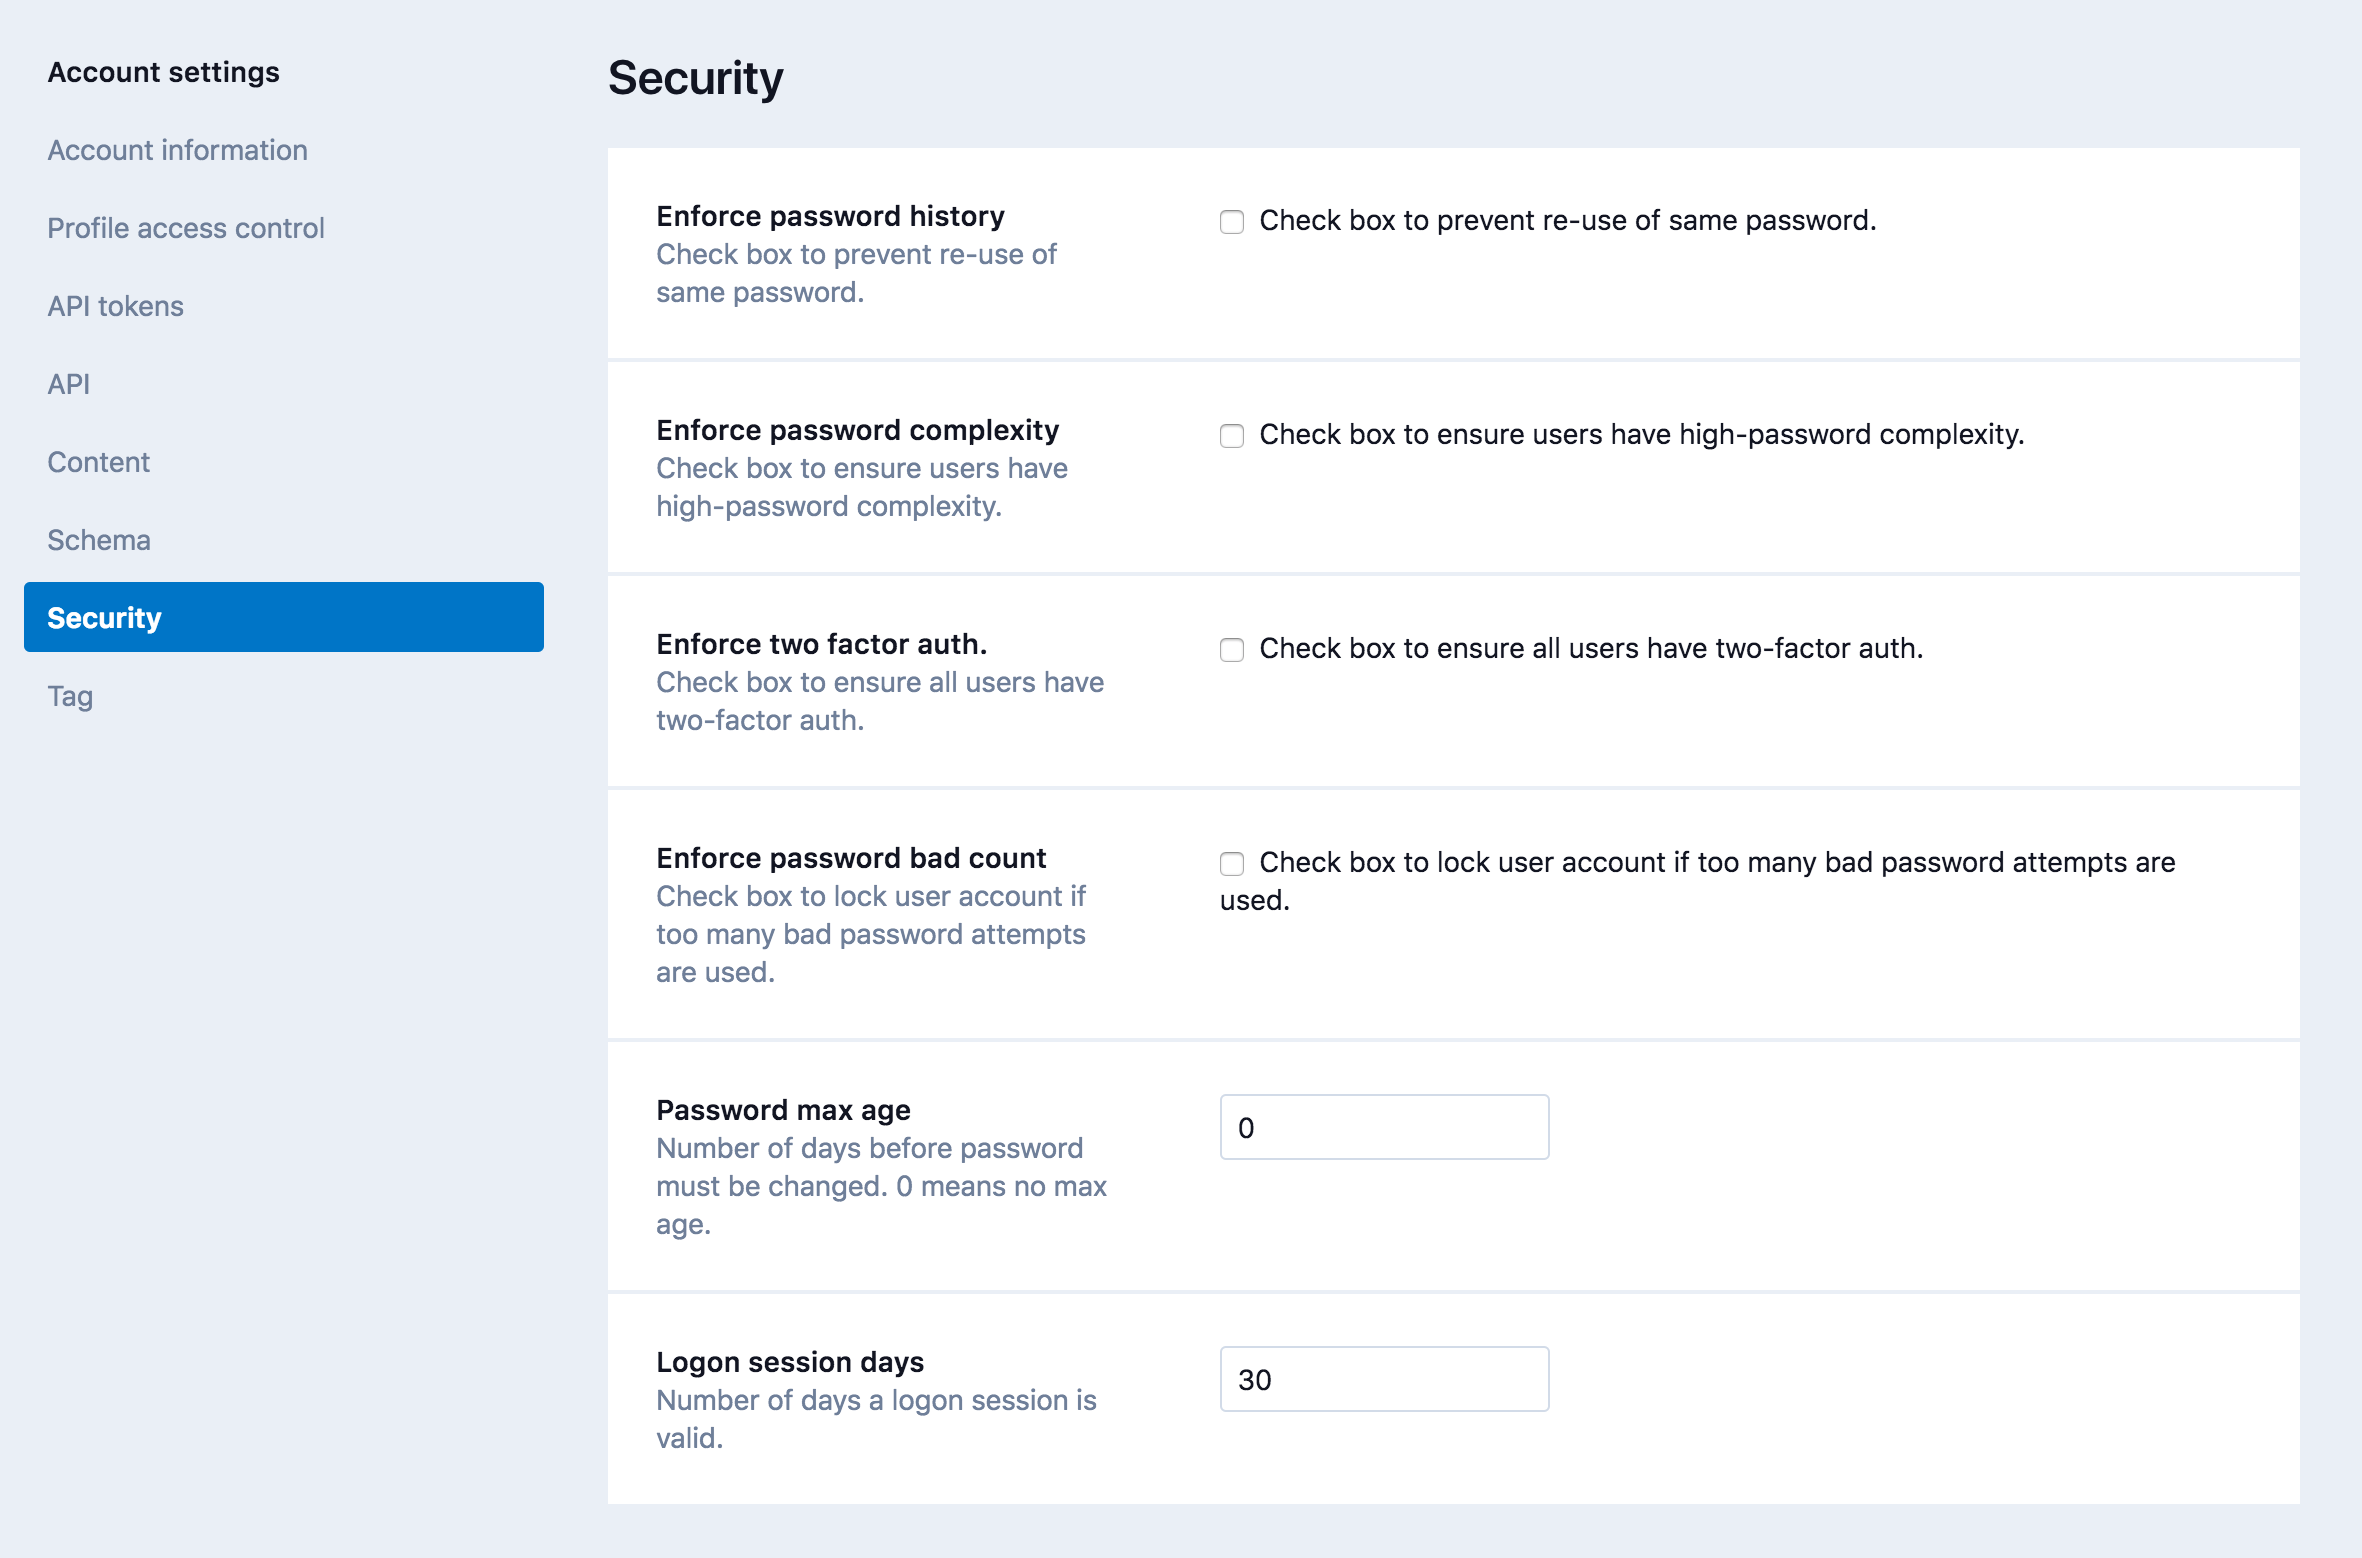 Account Settings - Security